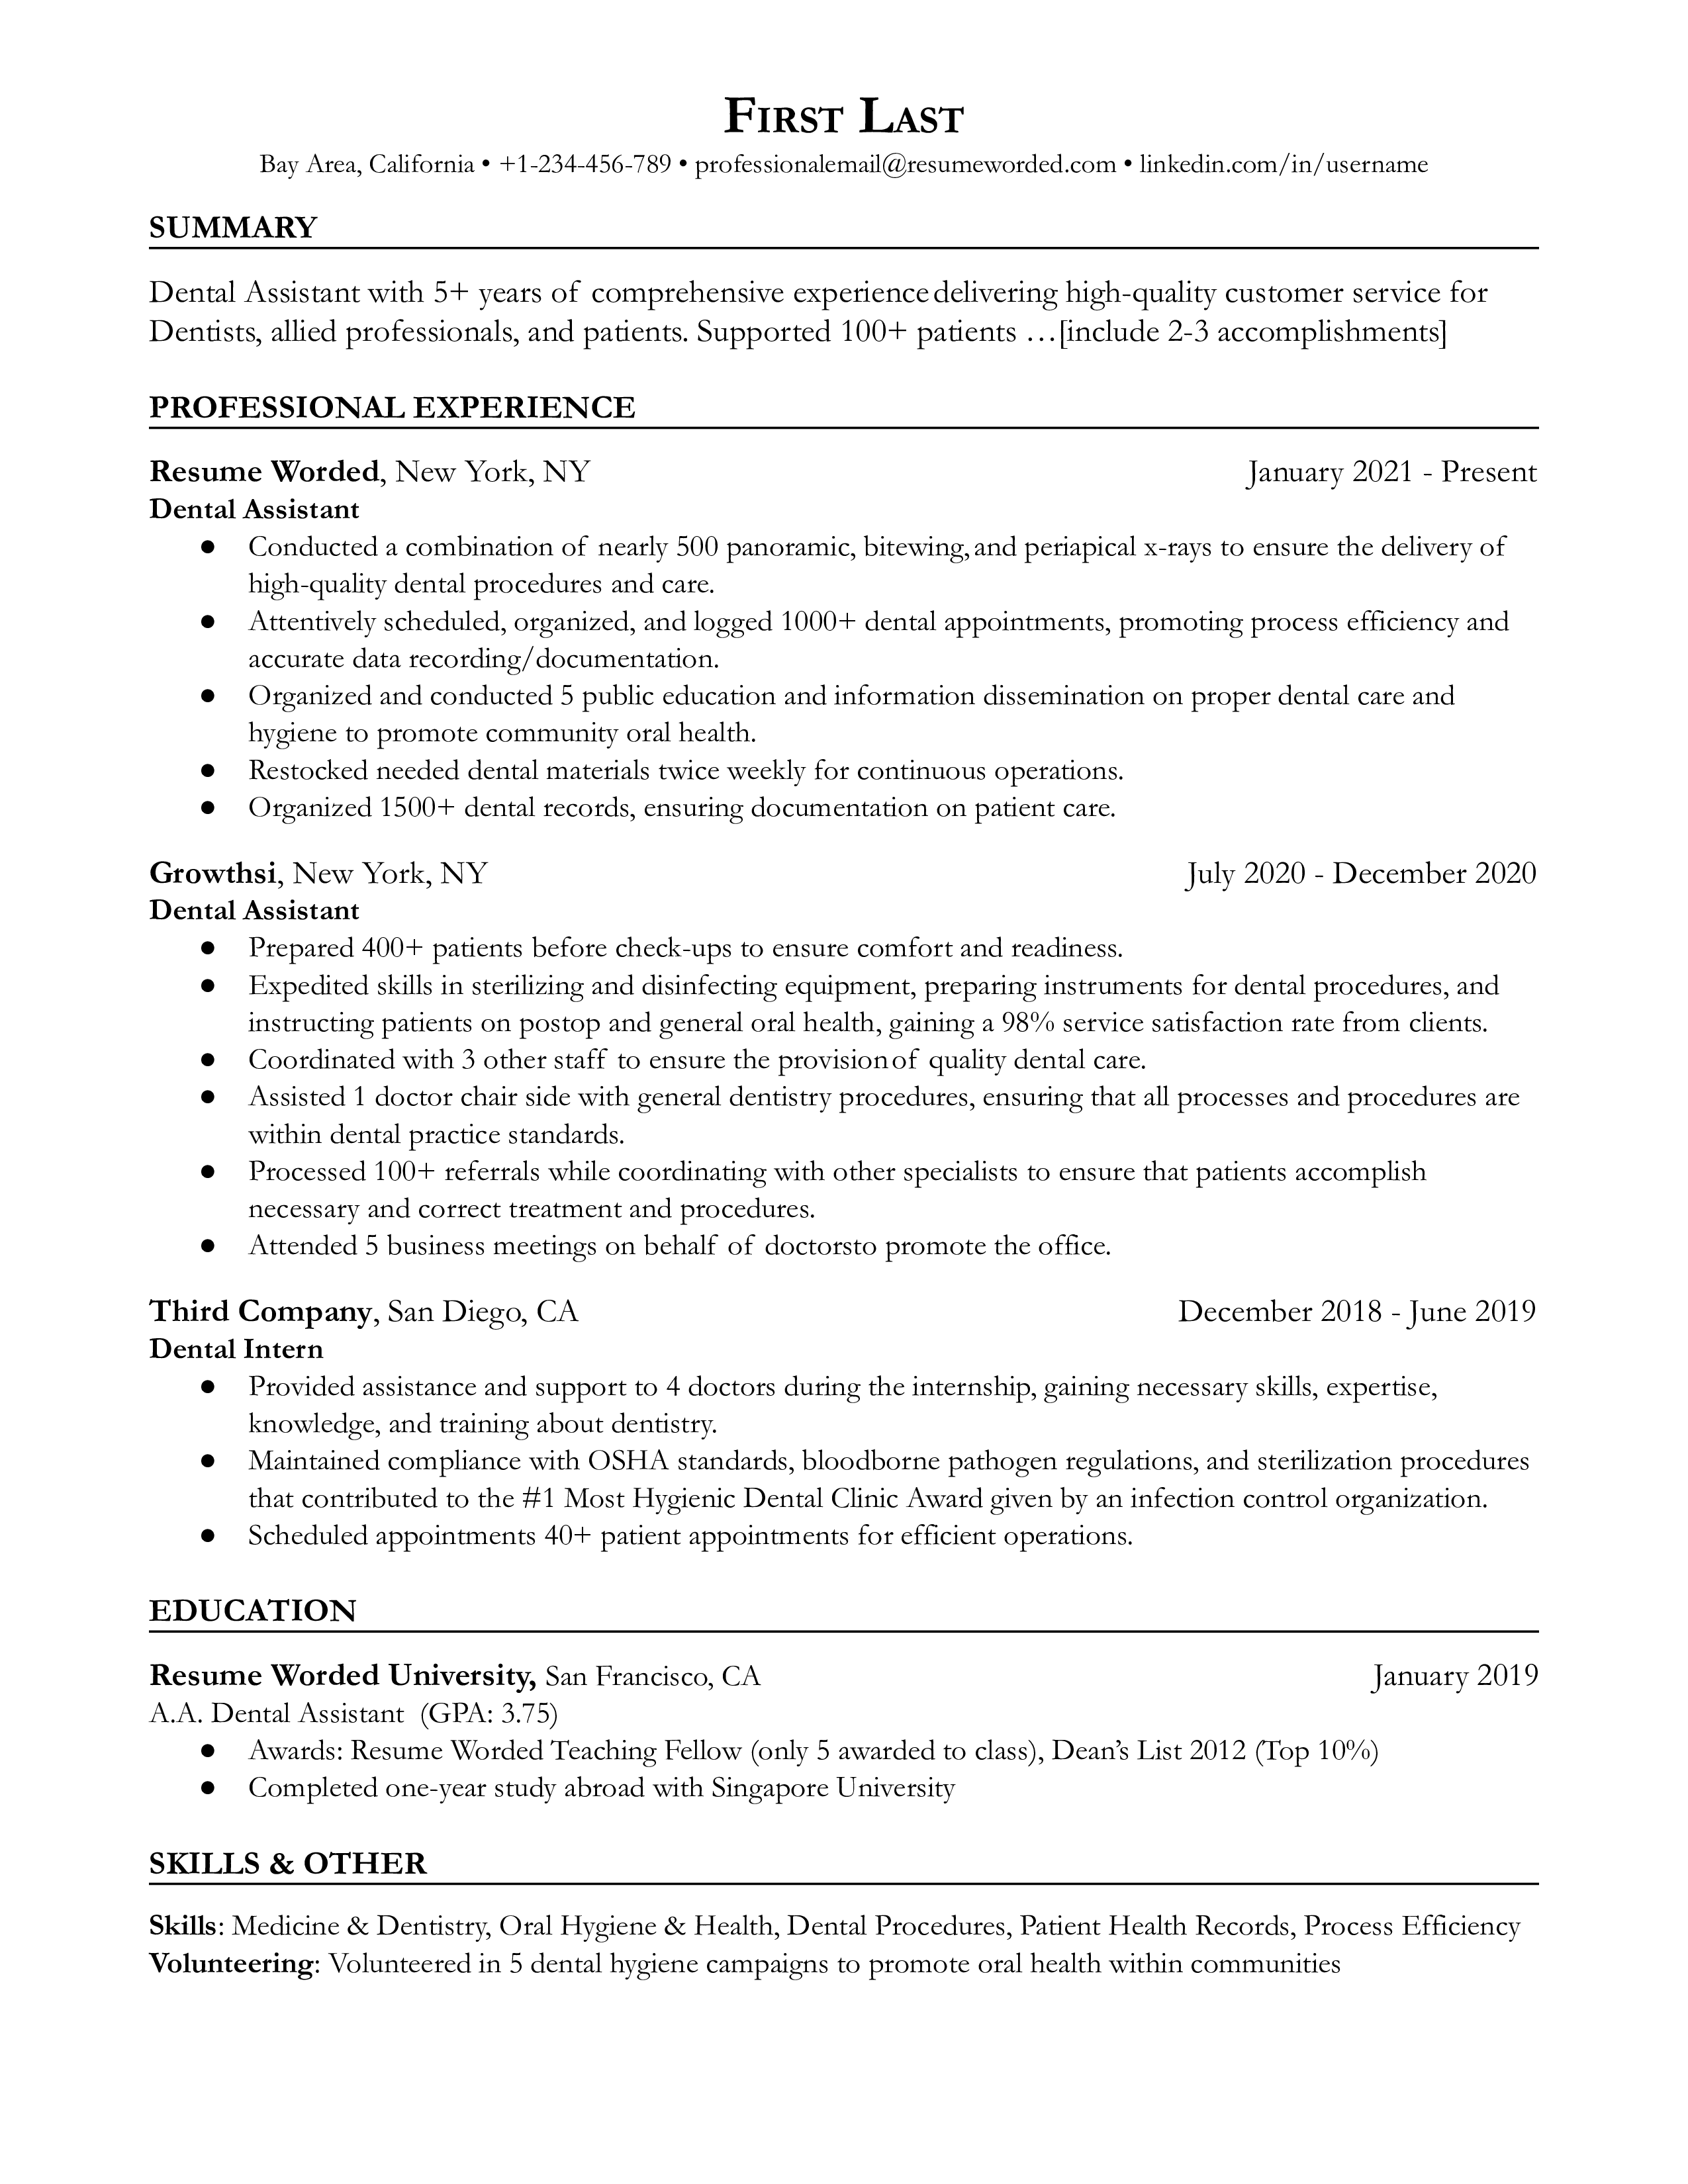 Dental assistant resume showcasing patient care and technology proficiency.